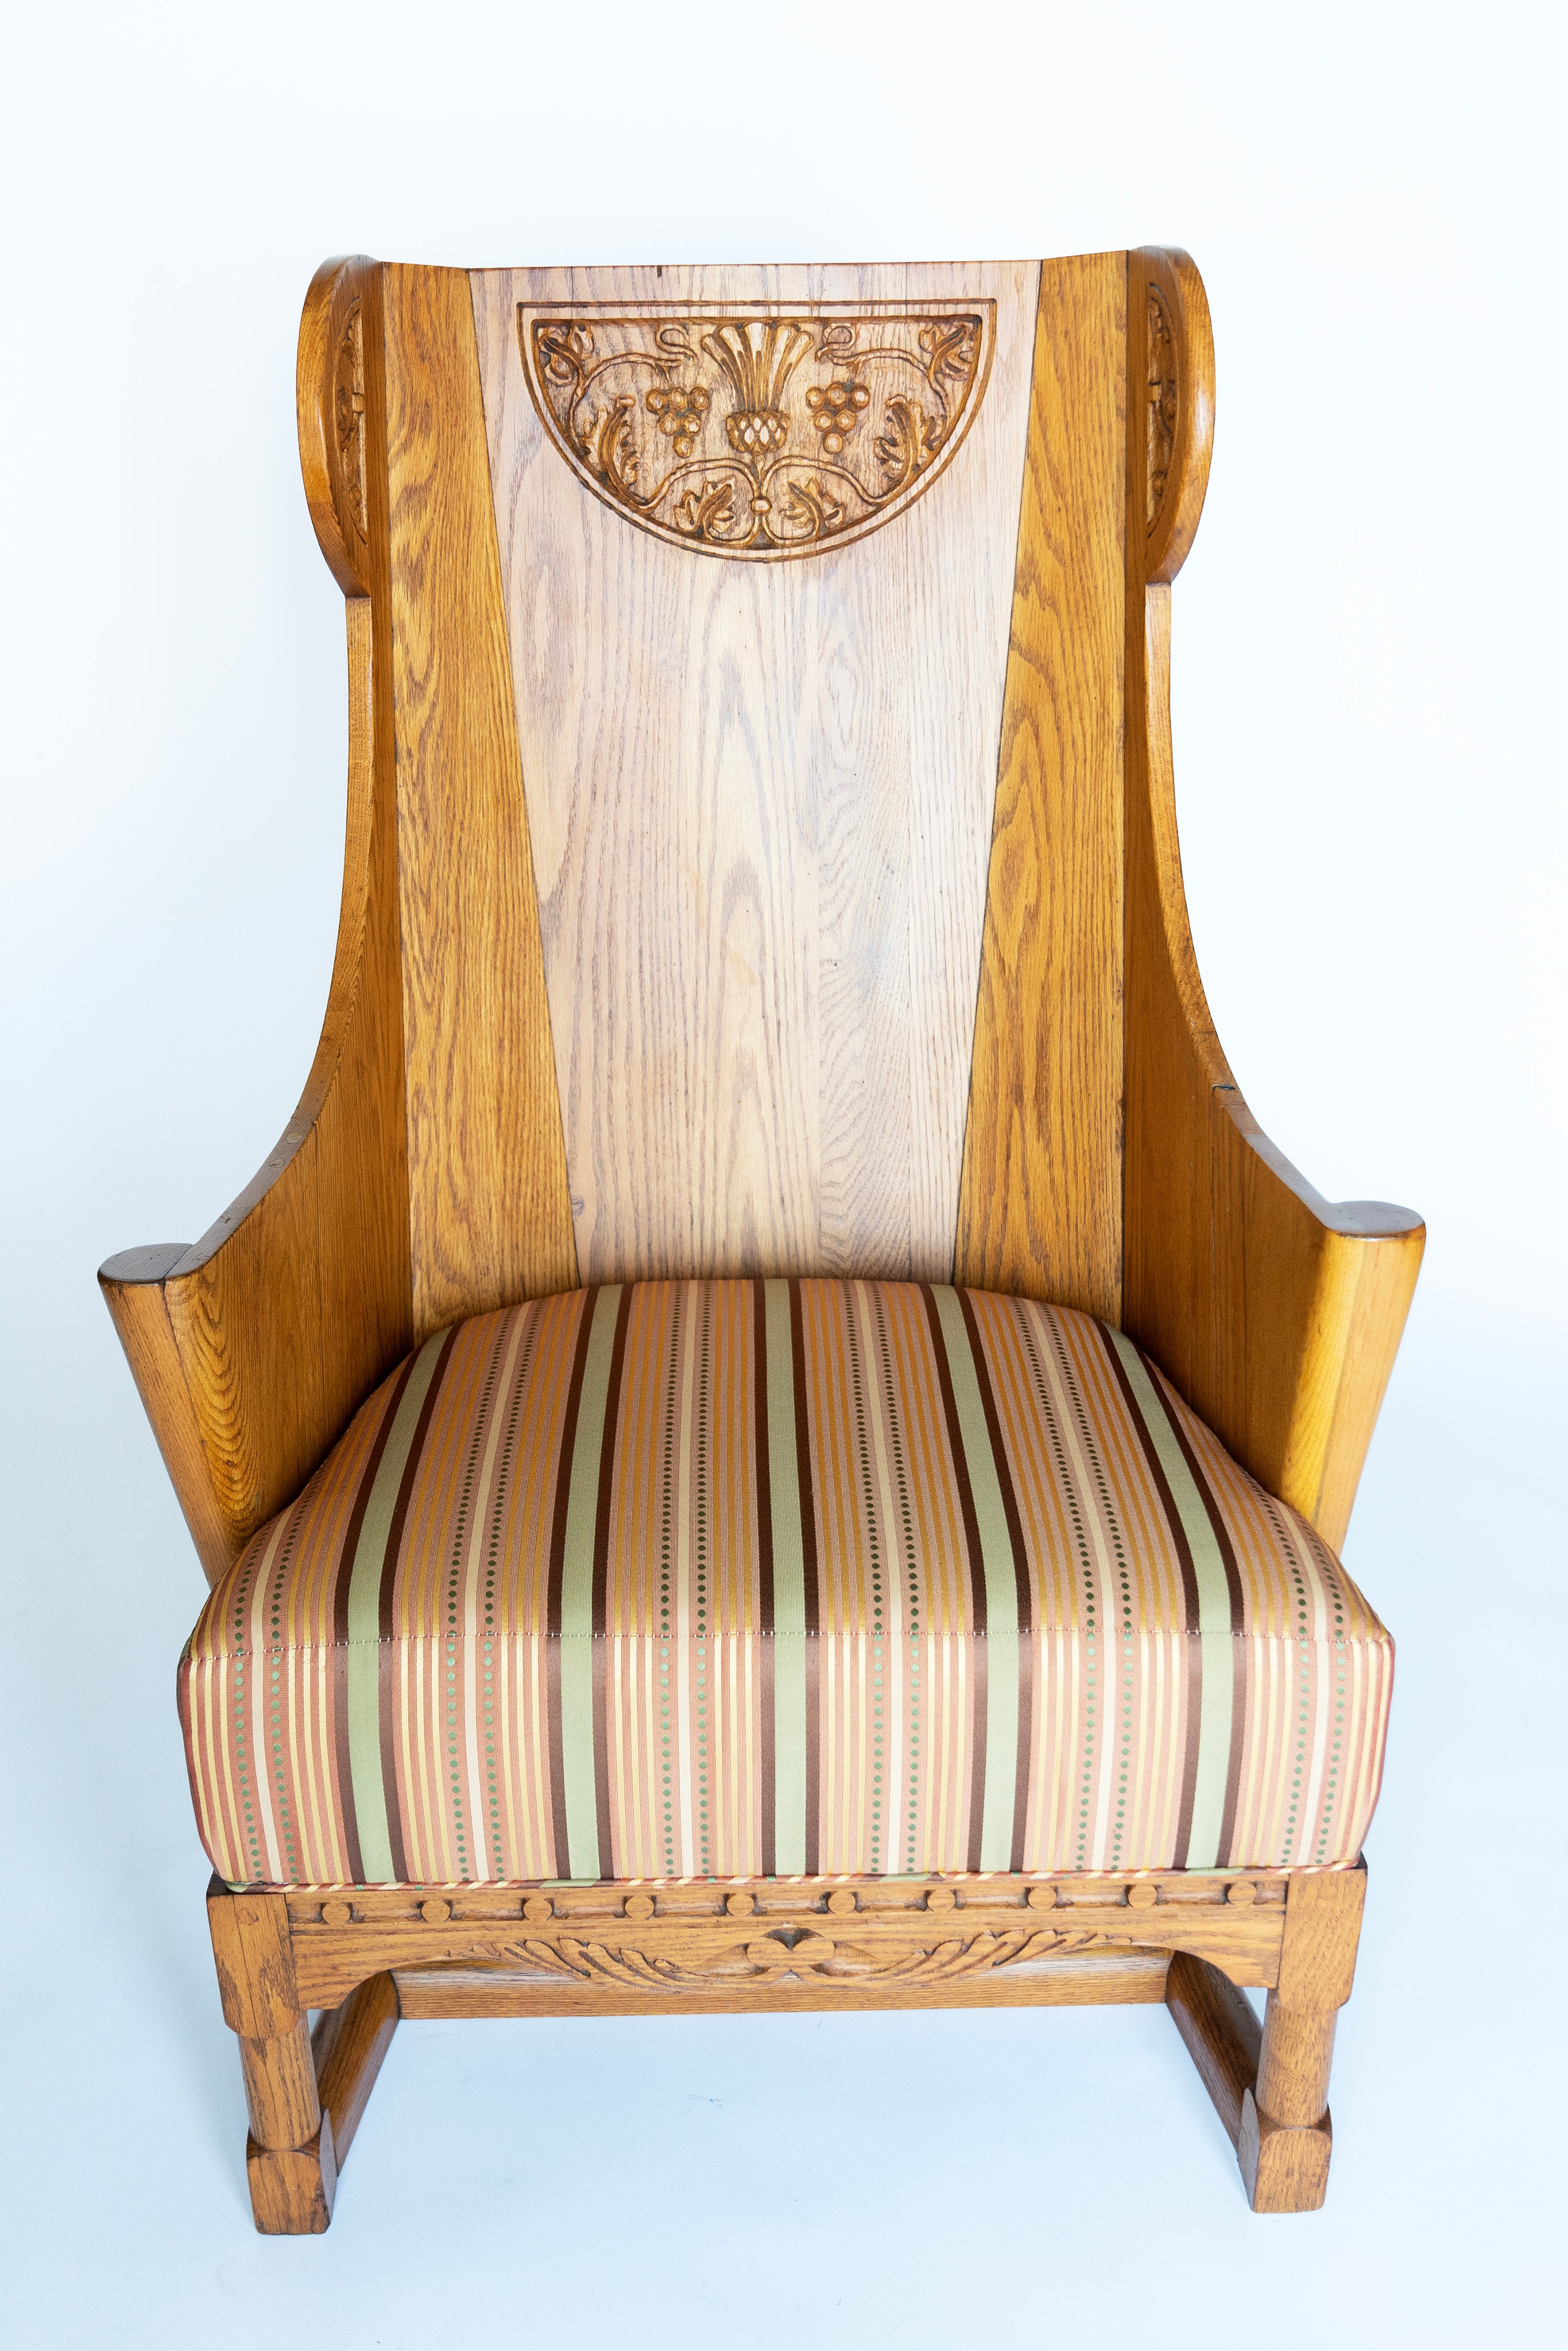 Oak Lounge Wingback Chair with Pineapple Carving